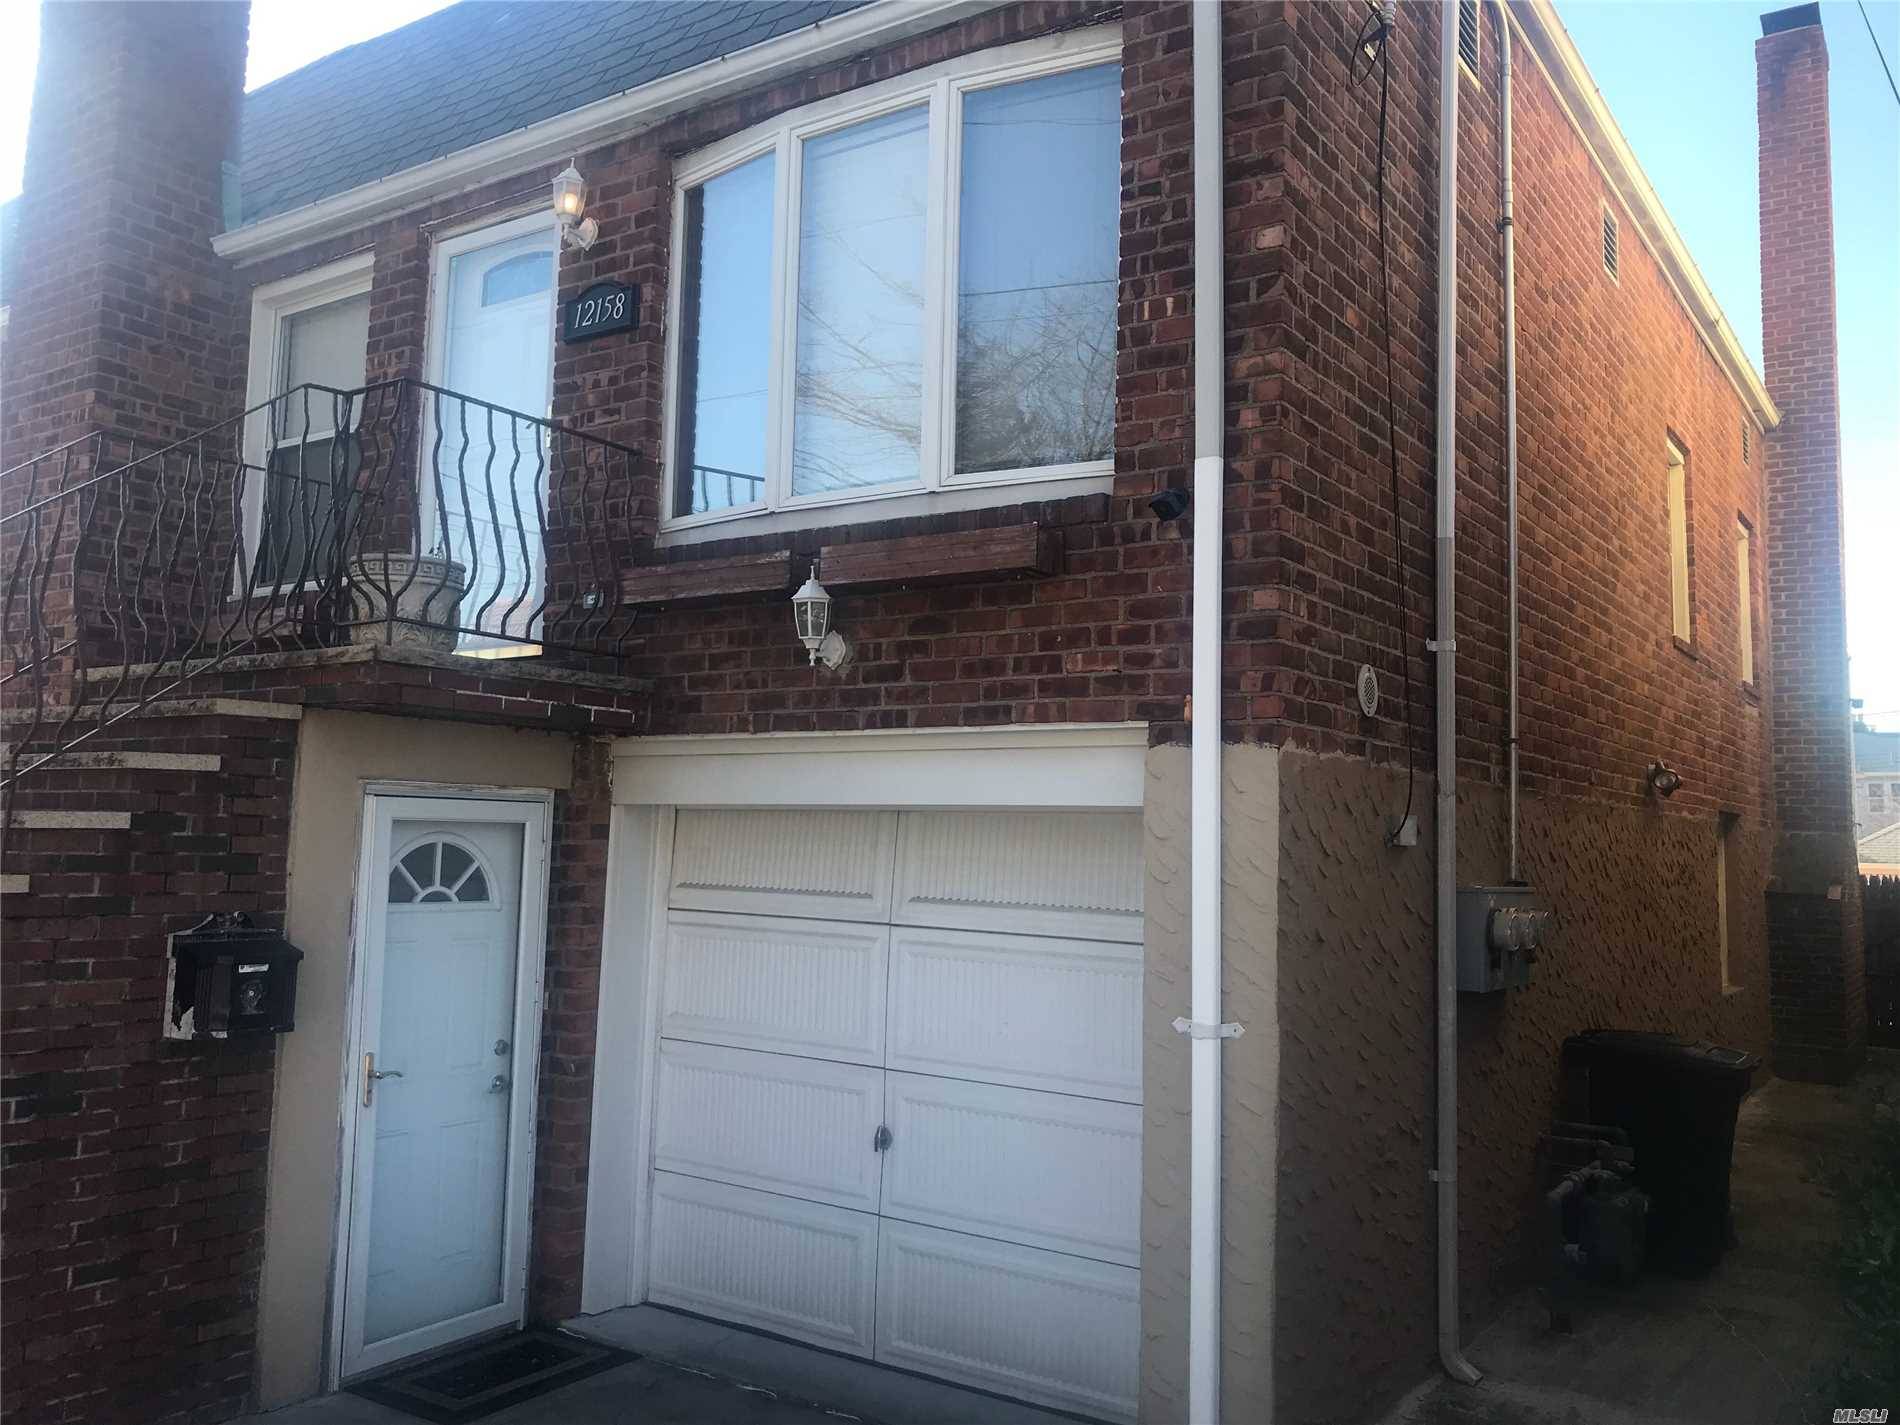 Excellent, 2 Family with 3 BR Over 1 BR, Separate GAS, ELECTRIC, BOILER and HOT WATER Tanks Upgraded Electric and Plumbing, 2 car Driveway, Garage, Semi Det, Large Backyard